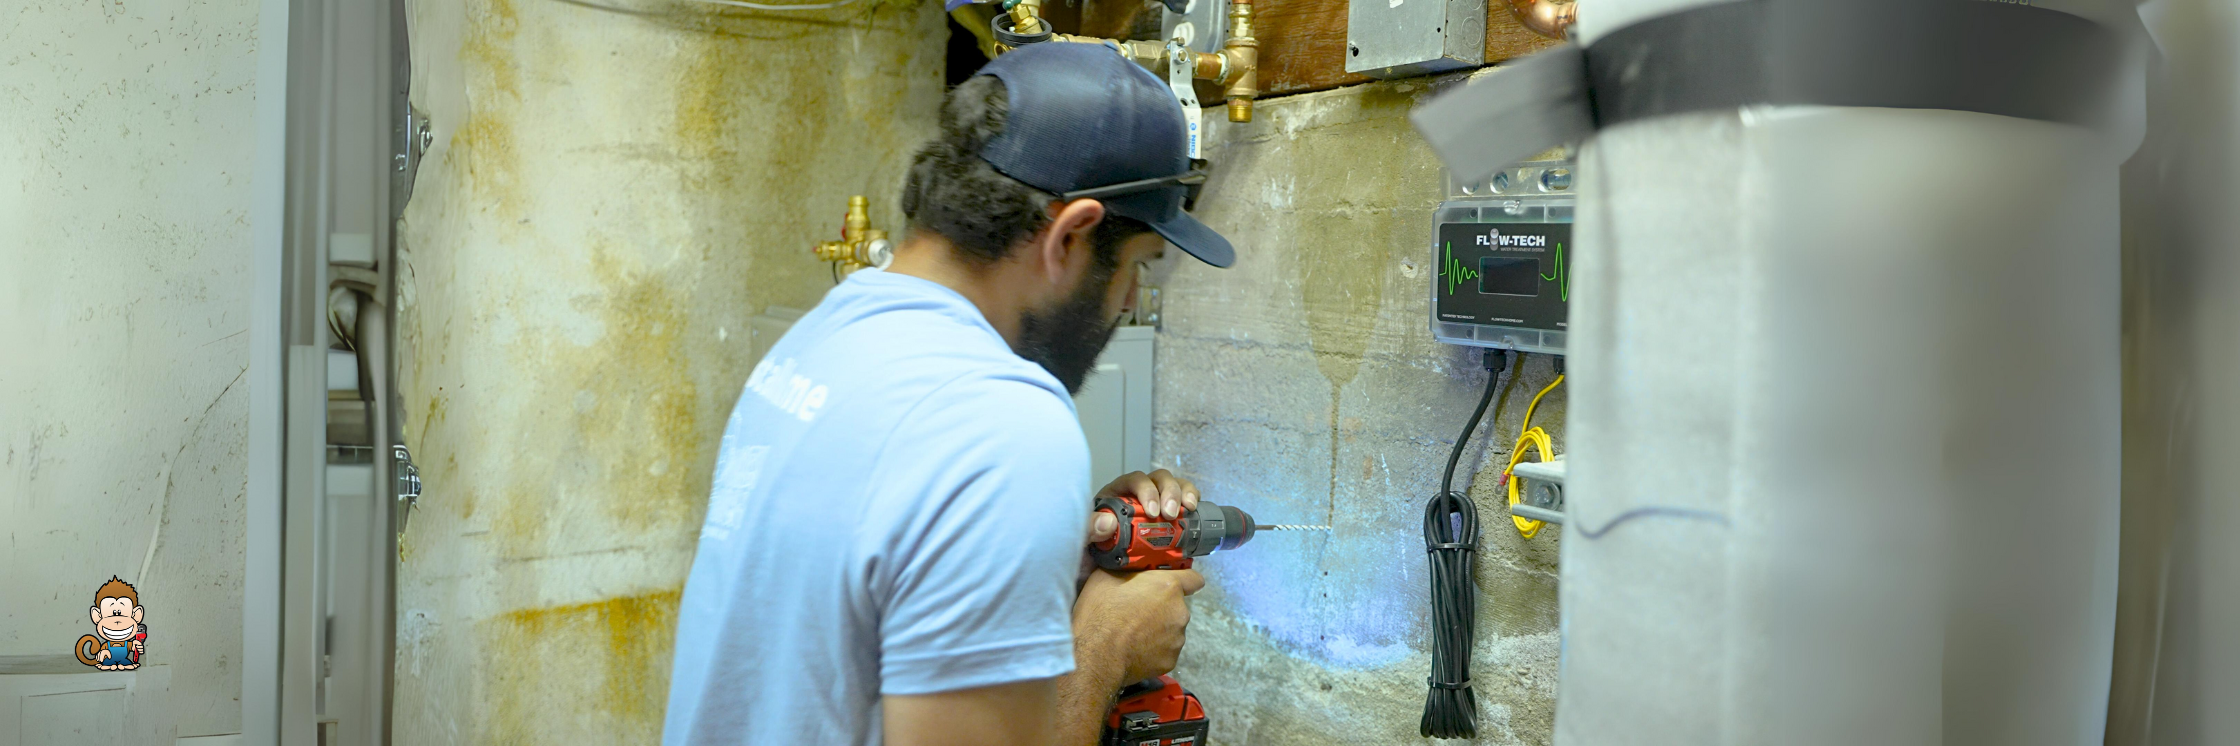 Basic Tankless Water Heater Installation with Monkey Wrench (video)